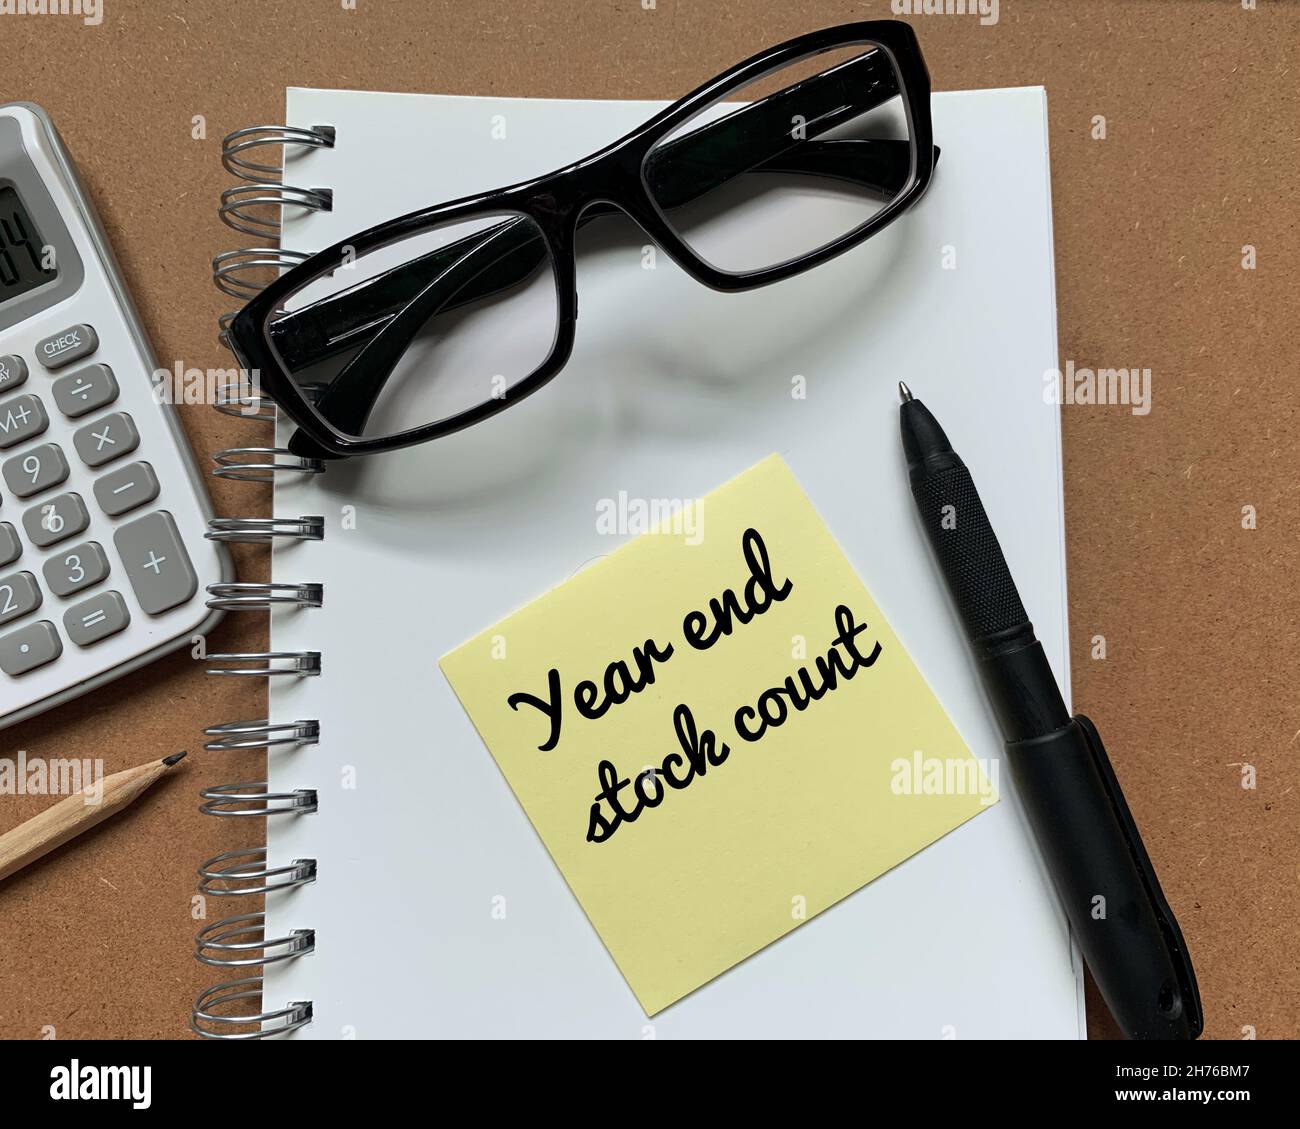 Year end stock count text on sticky note with calculation, pencil, pen and glasses next to a notepad Stock Photo